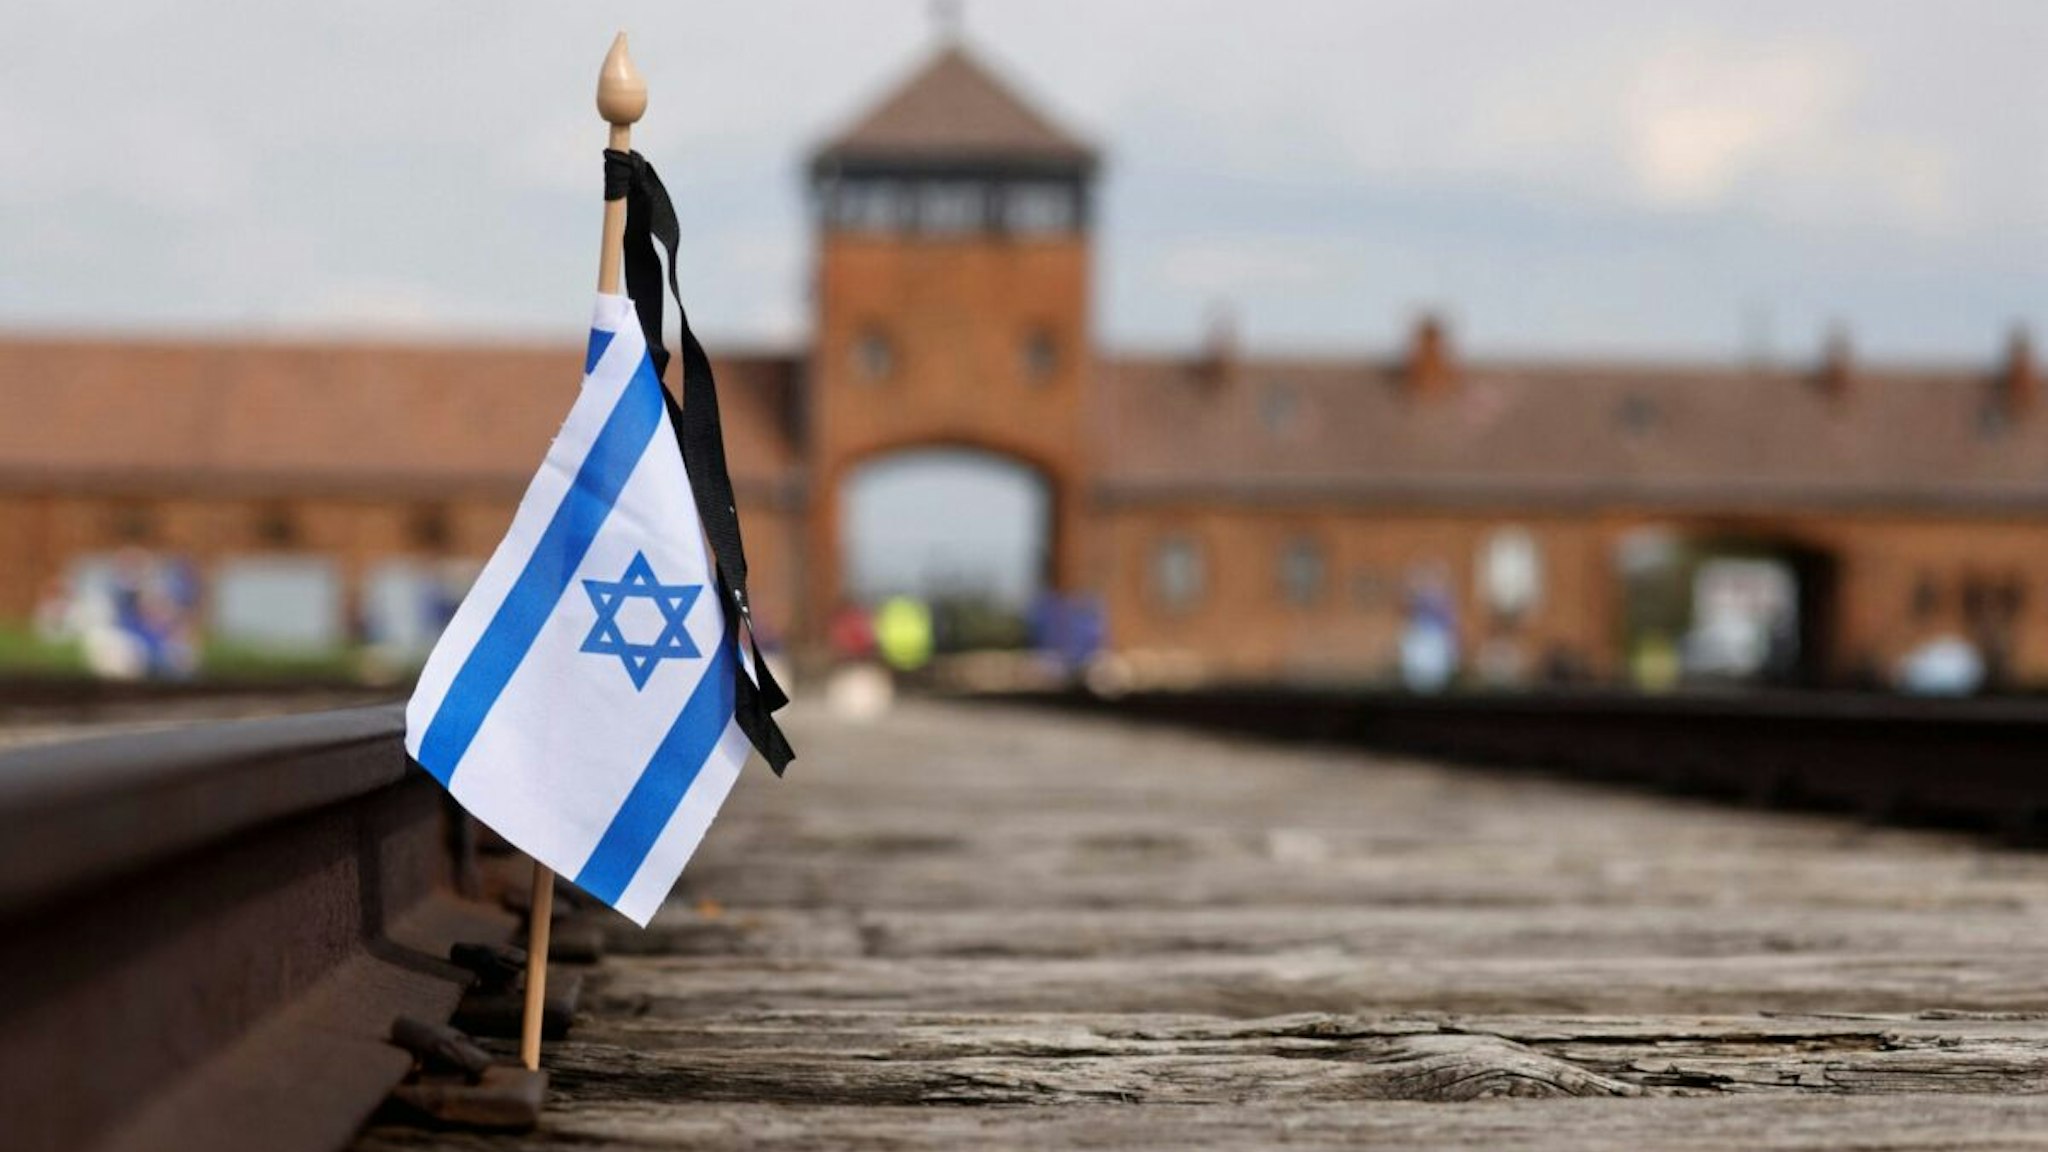 A small national flag of Israel has been placed on the rail tracks at the site of the former Auschwitz-Birkenau camp during commemorations to honour the victims of the Holocaust, near the historical gate of Birkenau (Auschwitz II) near the village of Brzezinka near Oswiecim, Poland on April 28, 2022